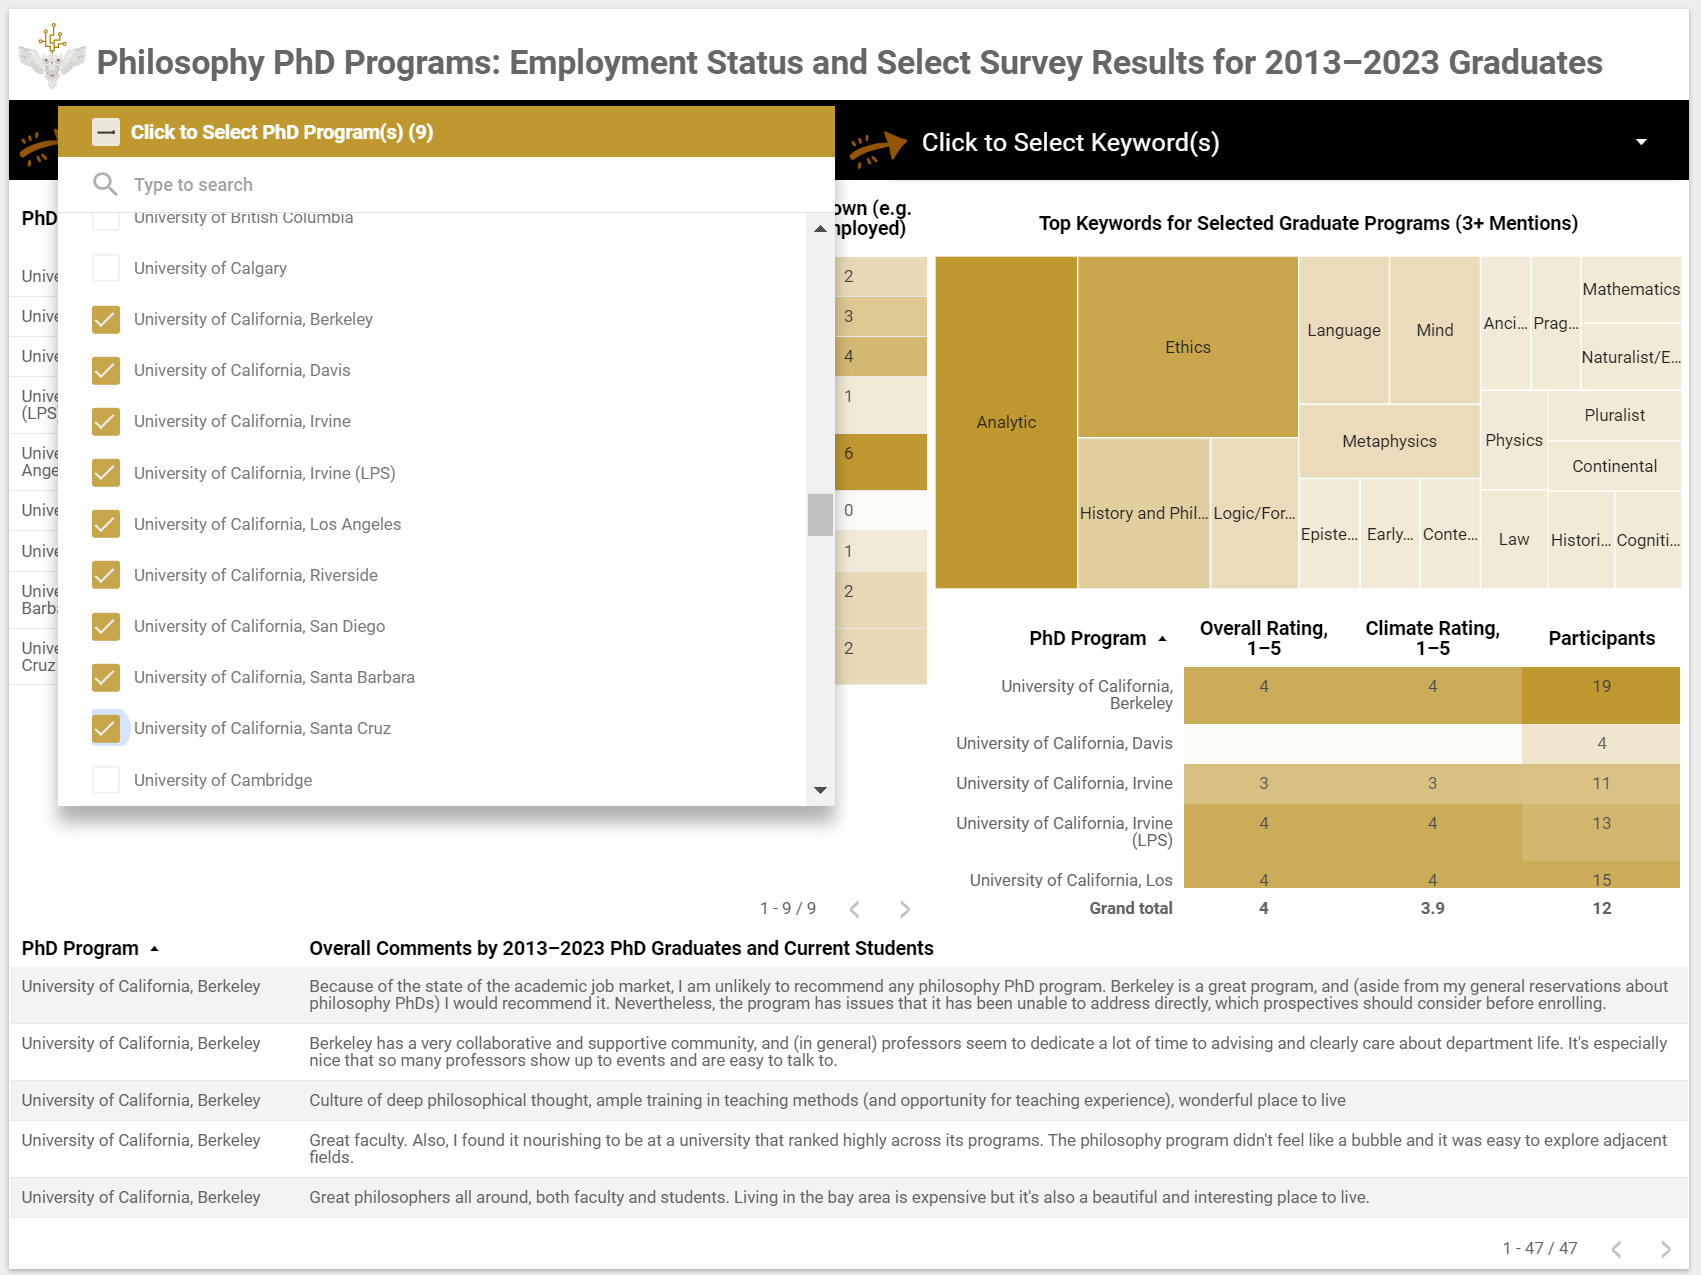 An image of the new data dashboard with the University of California campuses selected